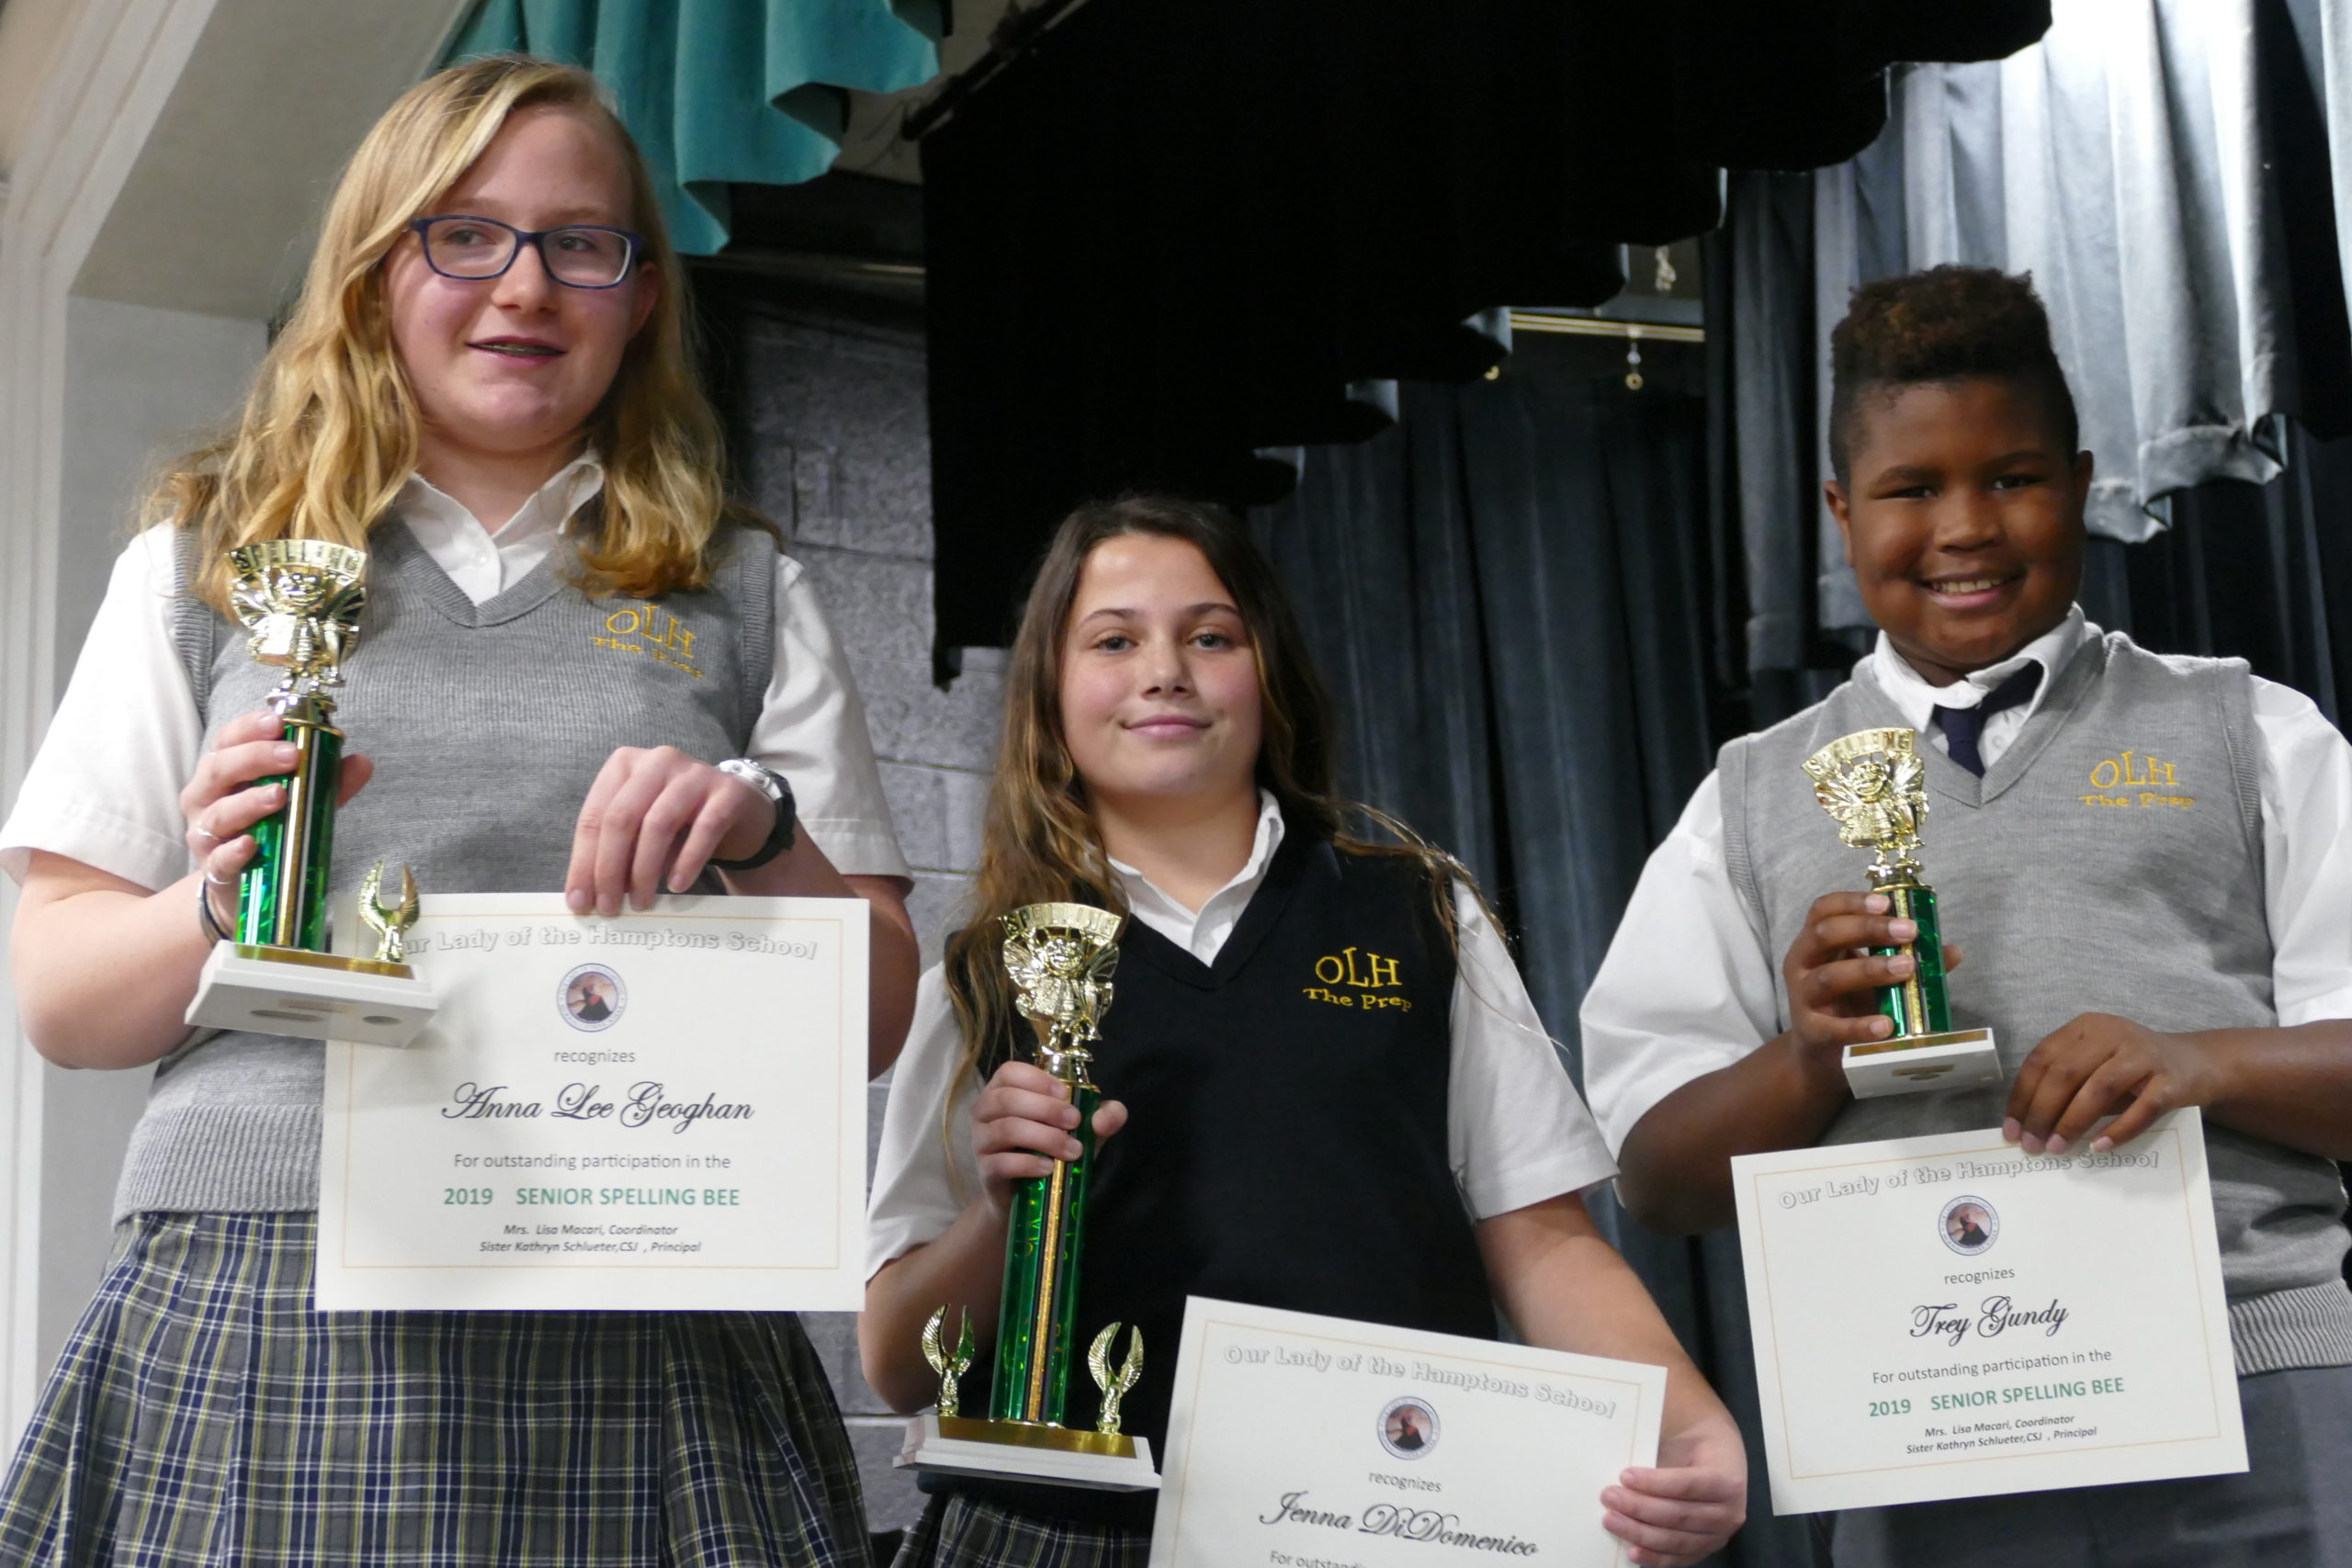 Our Lady of the Hamptons School Prep 6 student Jenna DiDomenico, center, of Hampton Bays was the winner of the school's Senior Spelling Bee. Jenna, who will now represent her school at the Long Island Spelling Bee, bested Prep 8 student Anna Lee Geoghan and Prep 6 student Trey Gundy in the final rounds.